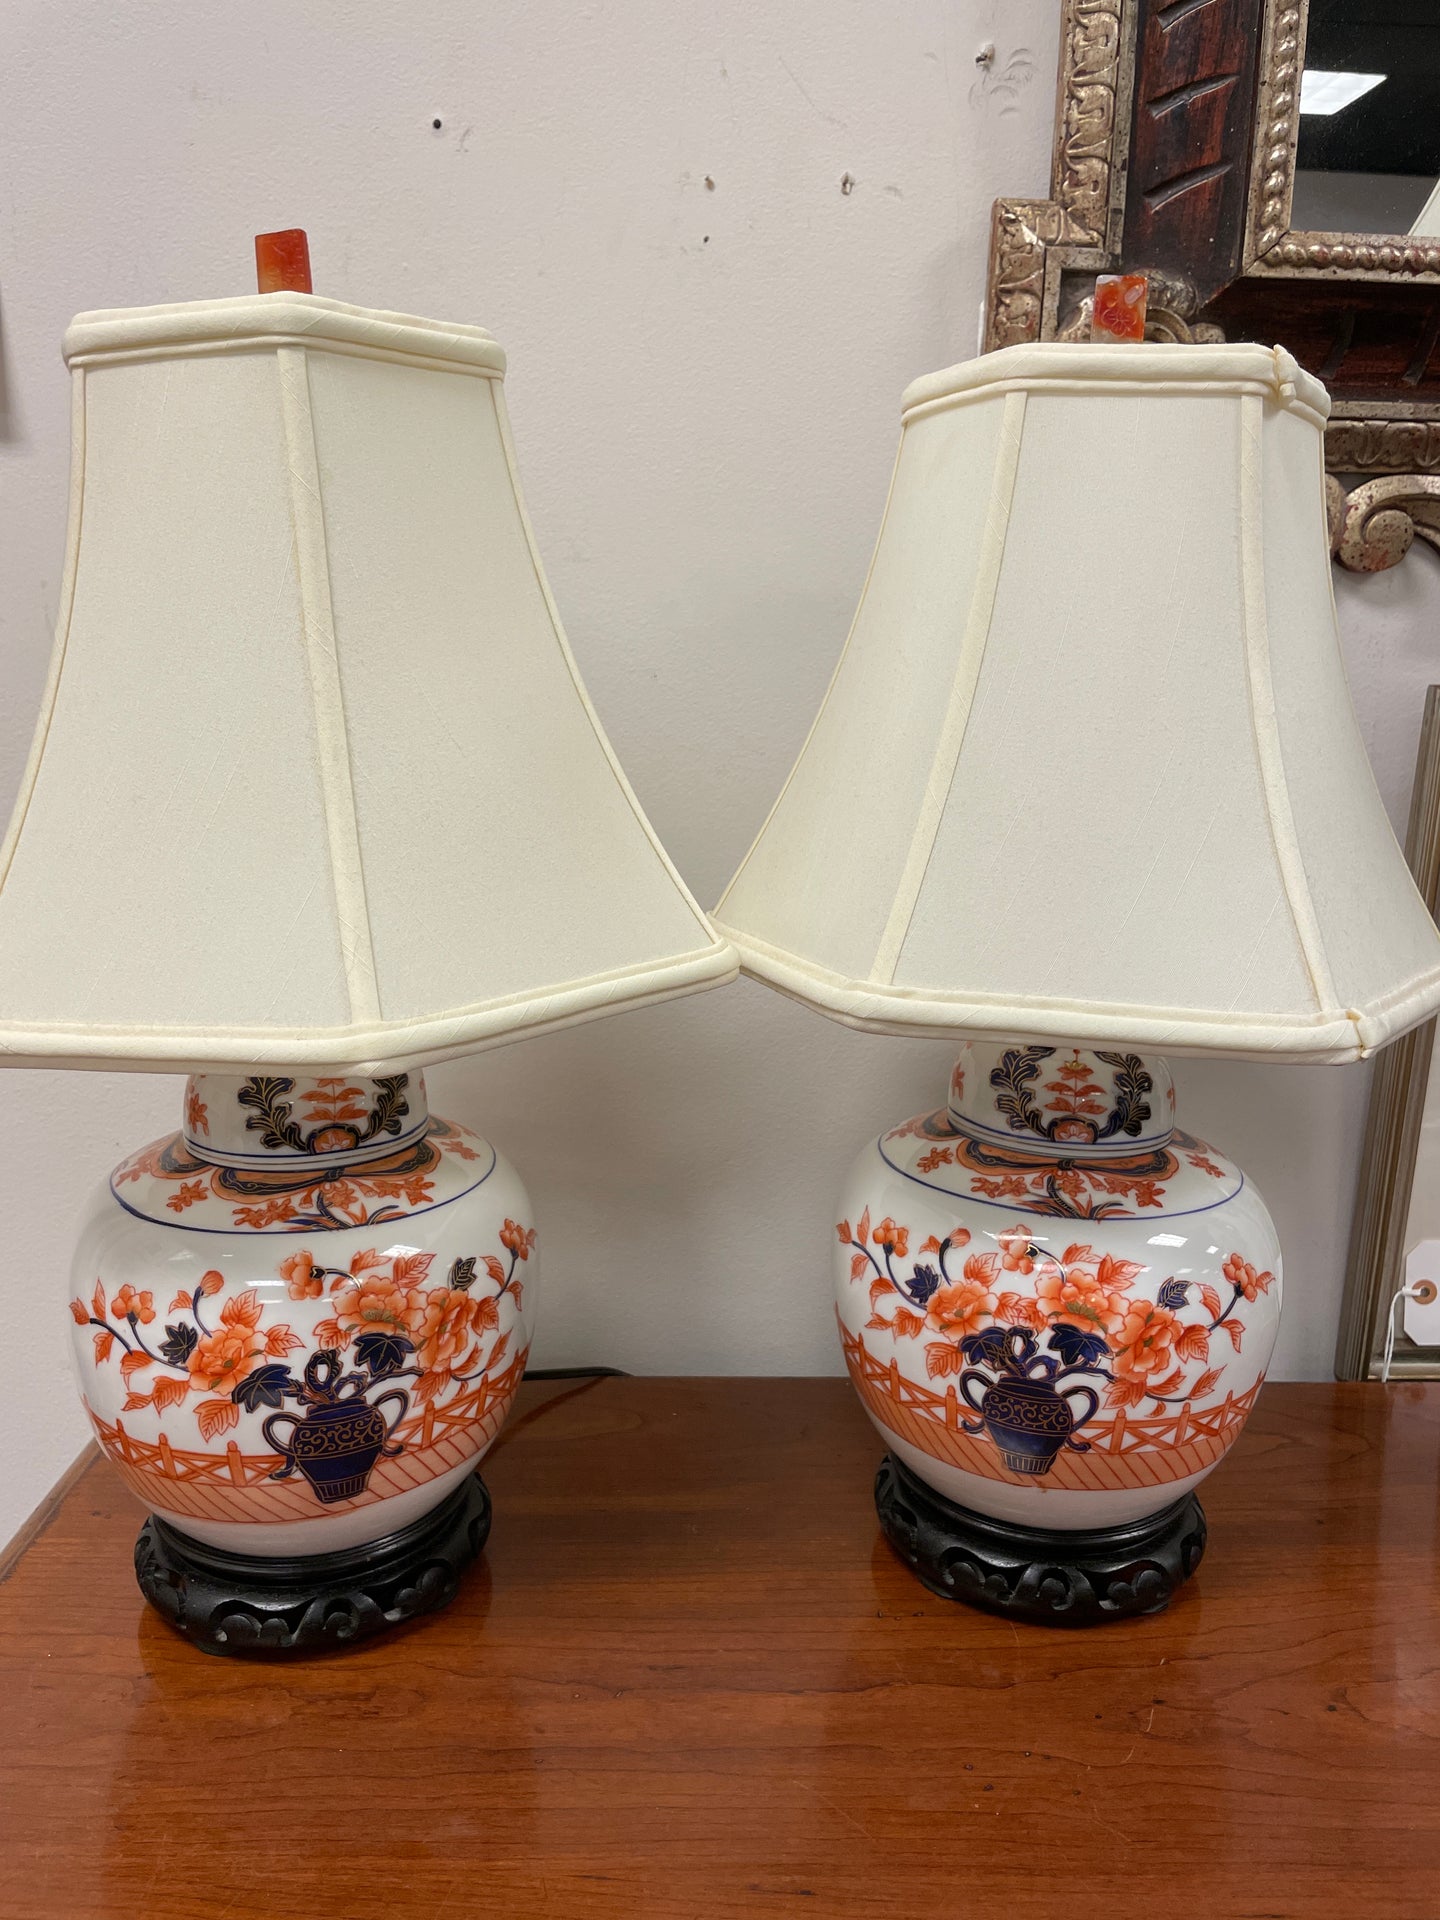 Pair of Porcelain Asian Inspired Table Lamps with Wood Base